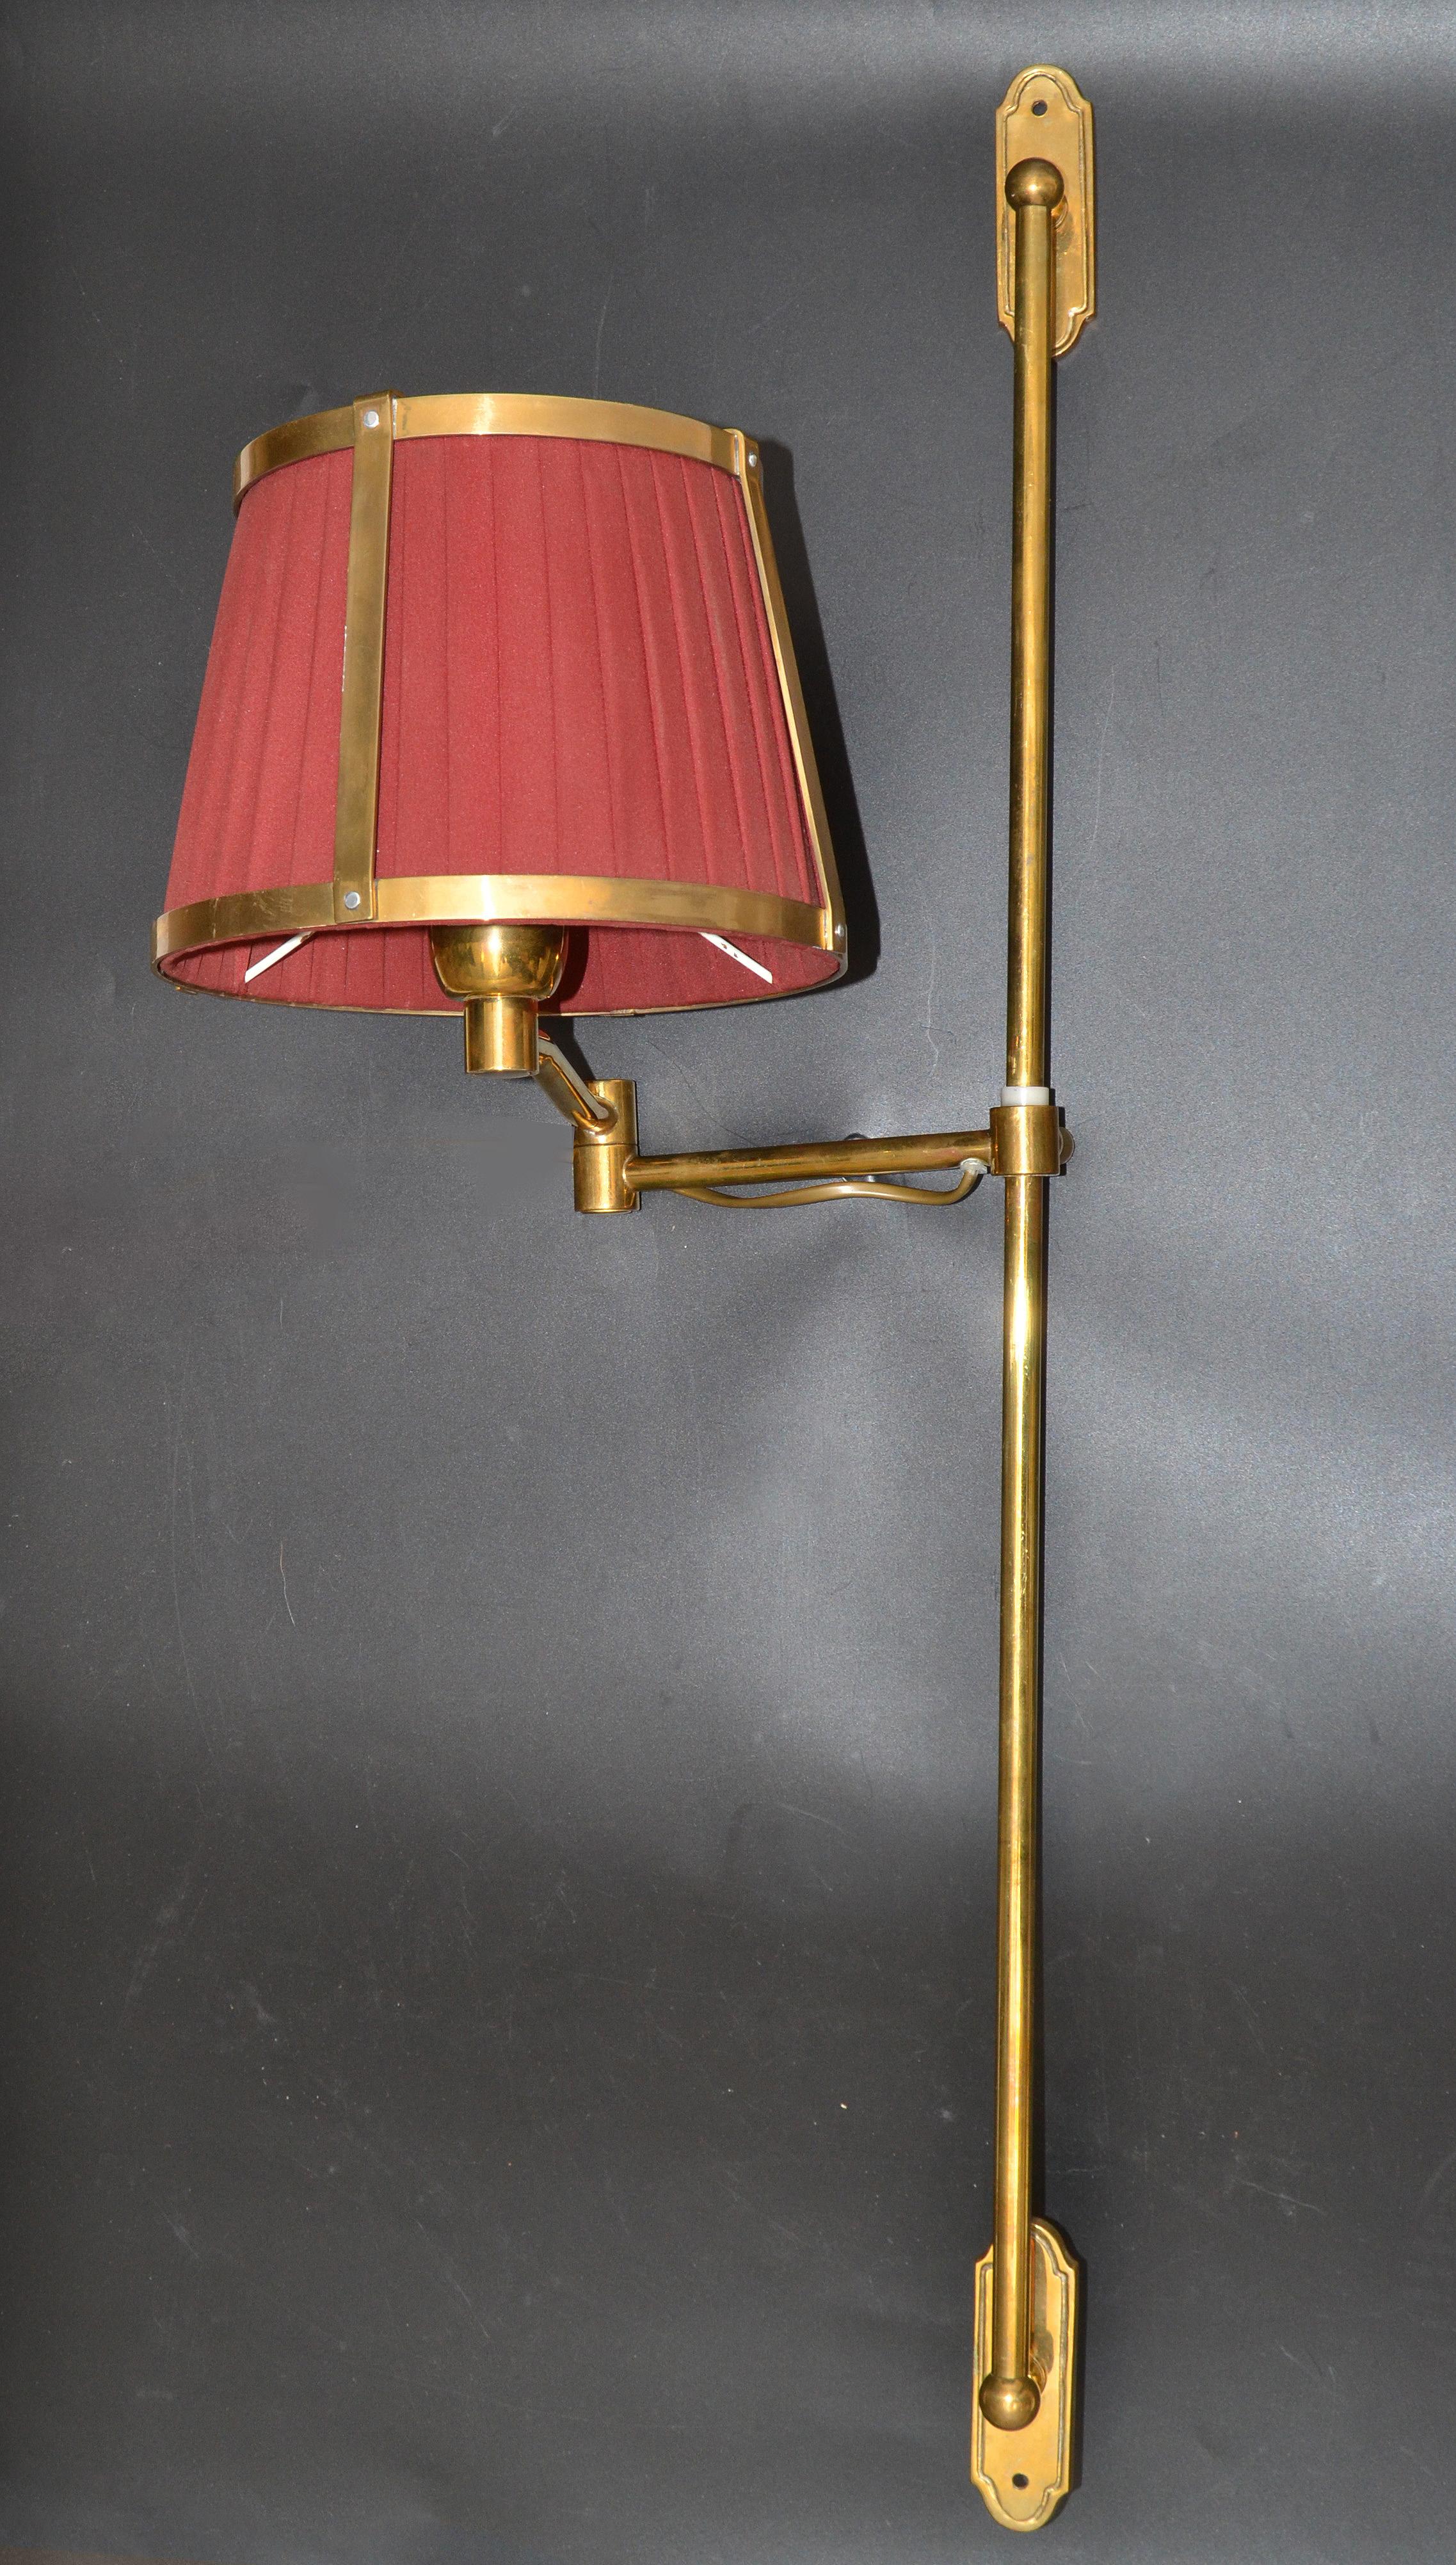 Mid-Century Modern Pair Marina Retractable Swing Arm Sconces Original Brass Shades 2 Sets Available